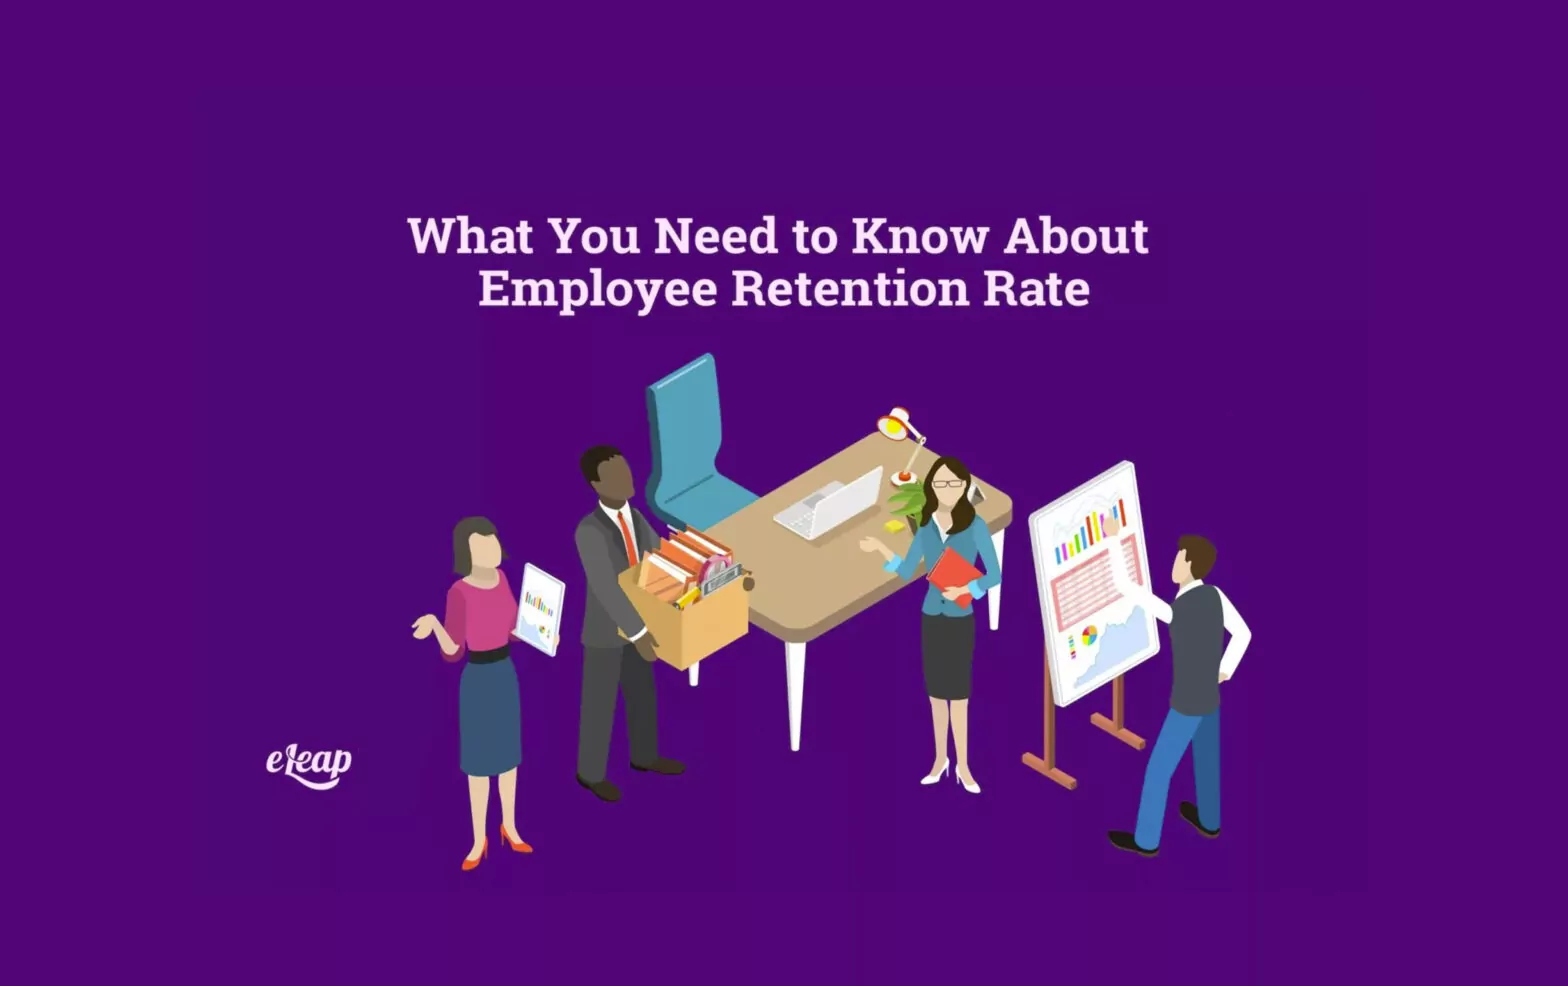 What You Need to Know About Employee Retention Rate